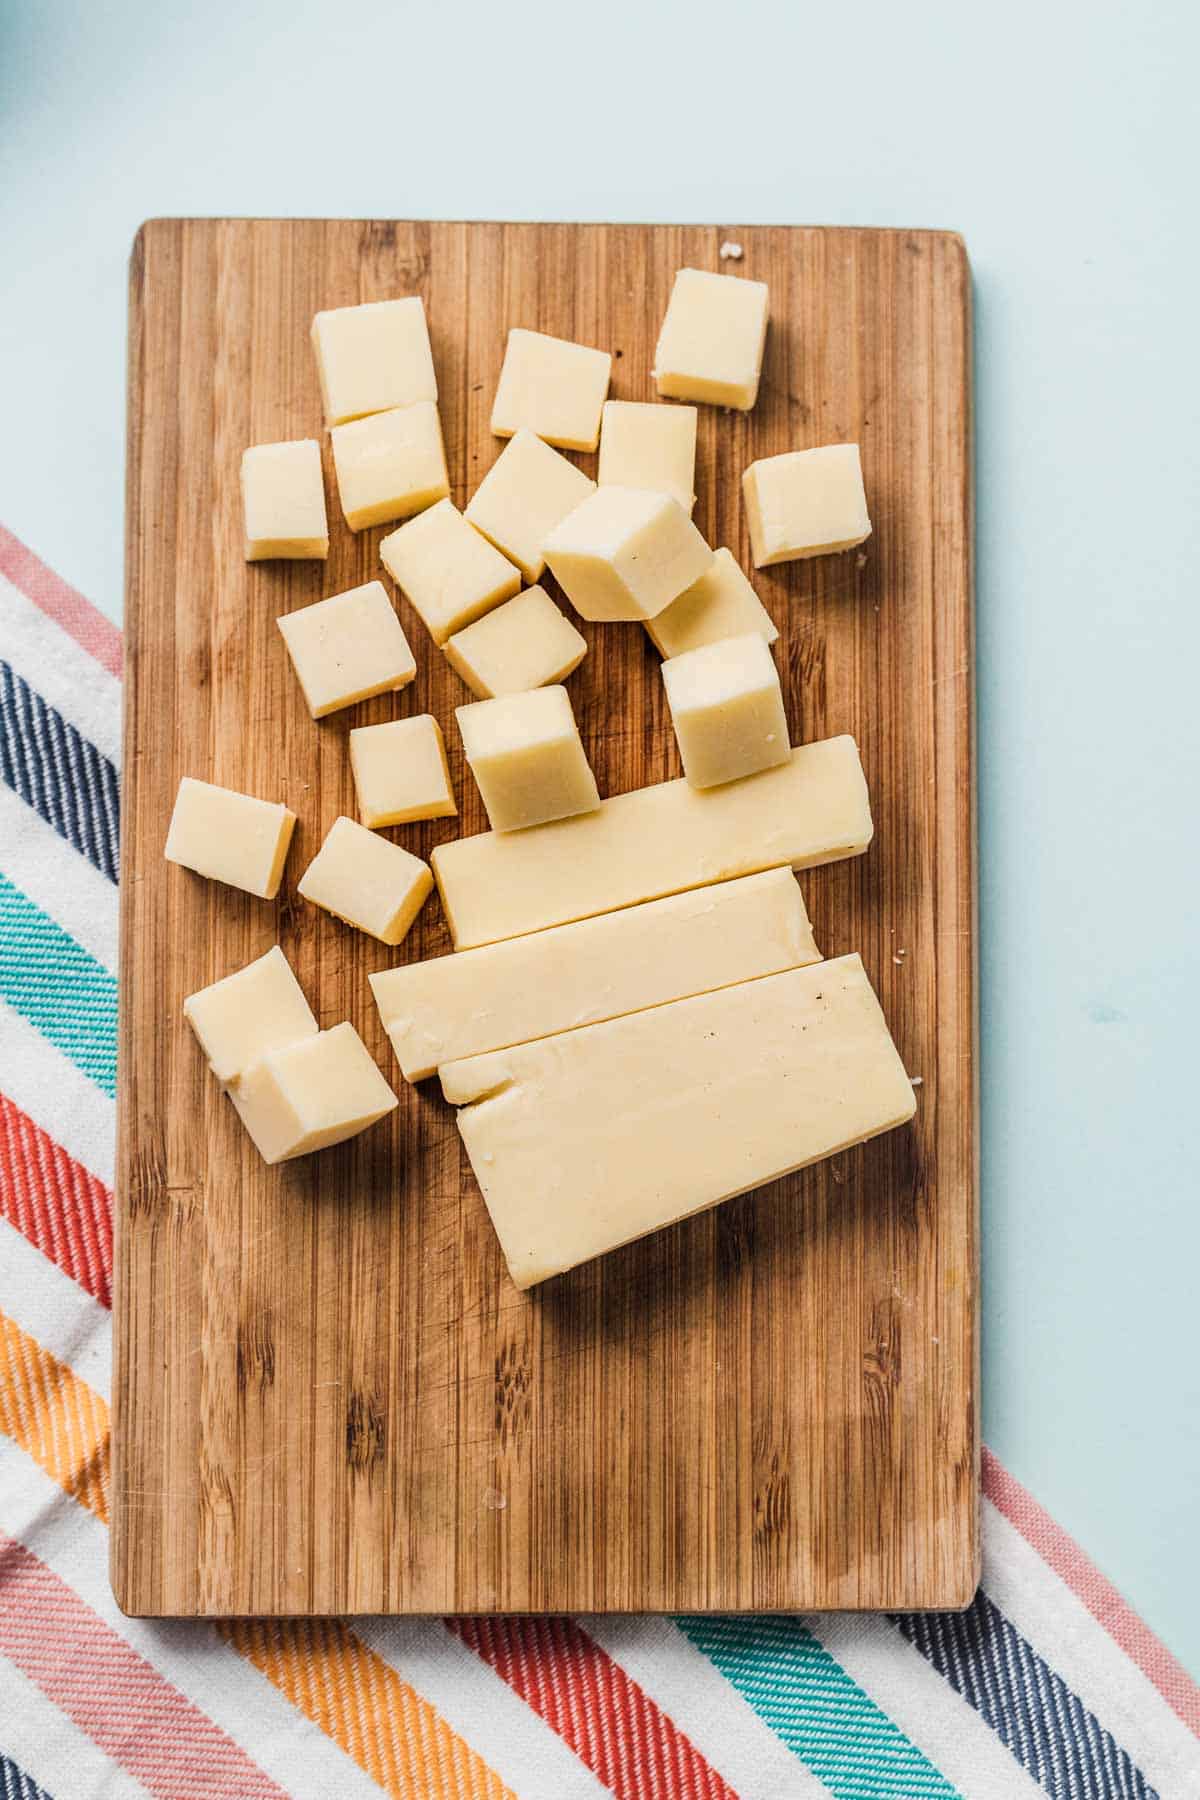 Birds eye view of cheese cubes on a wooden cutting board.